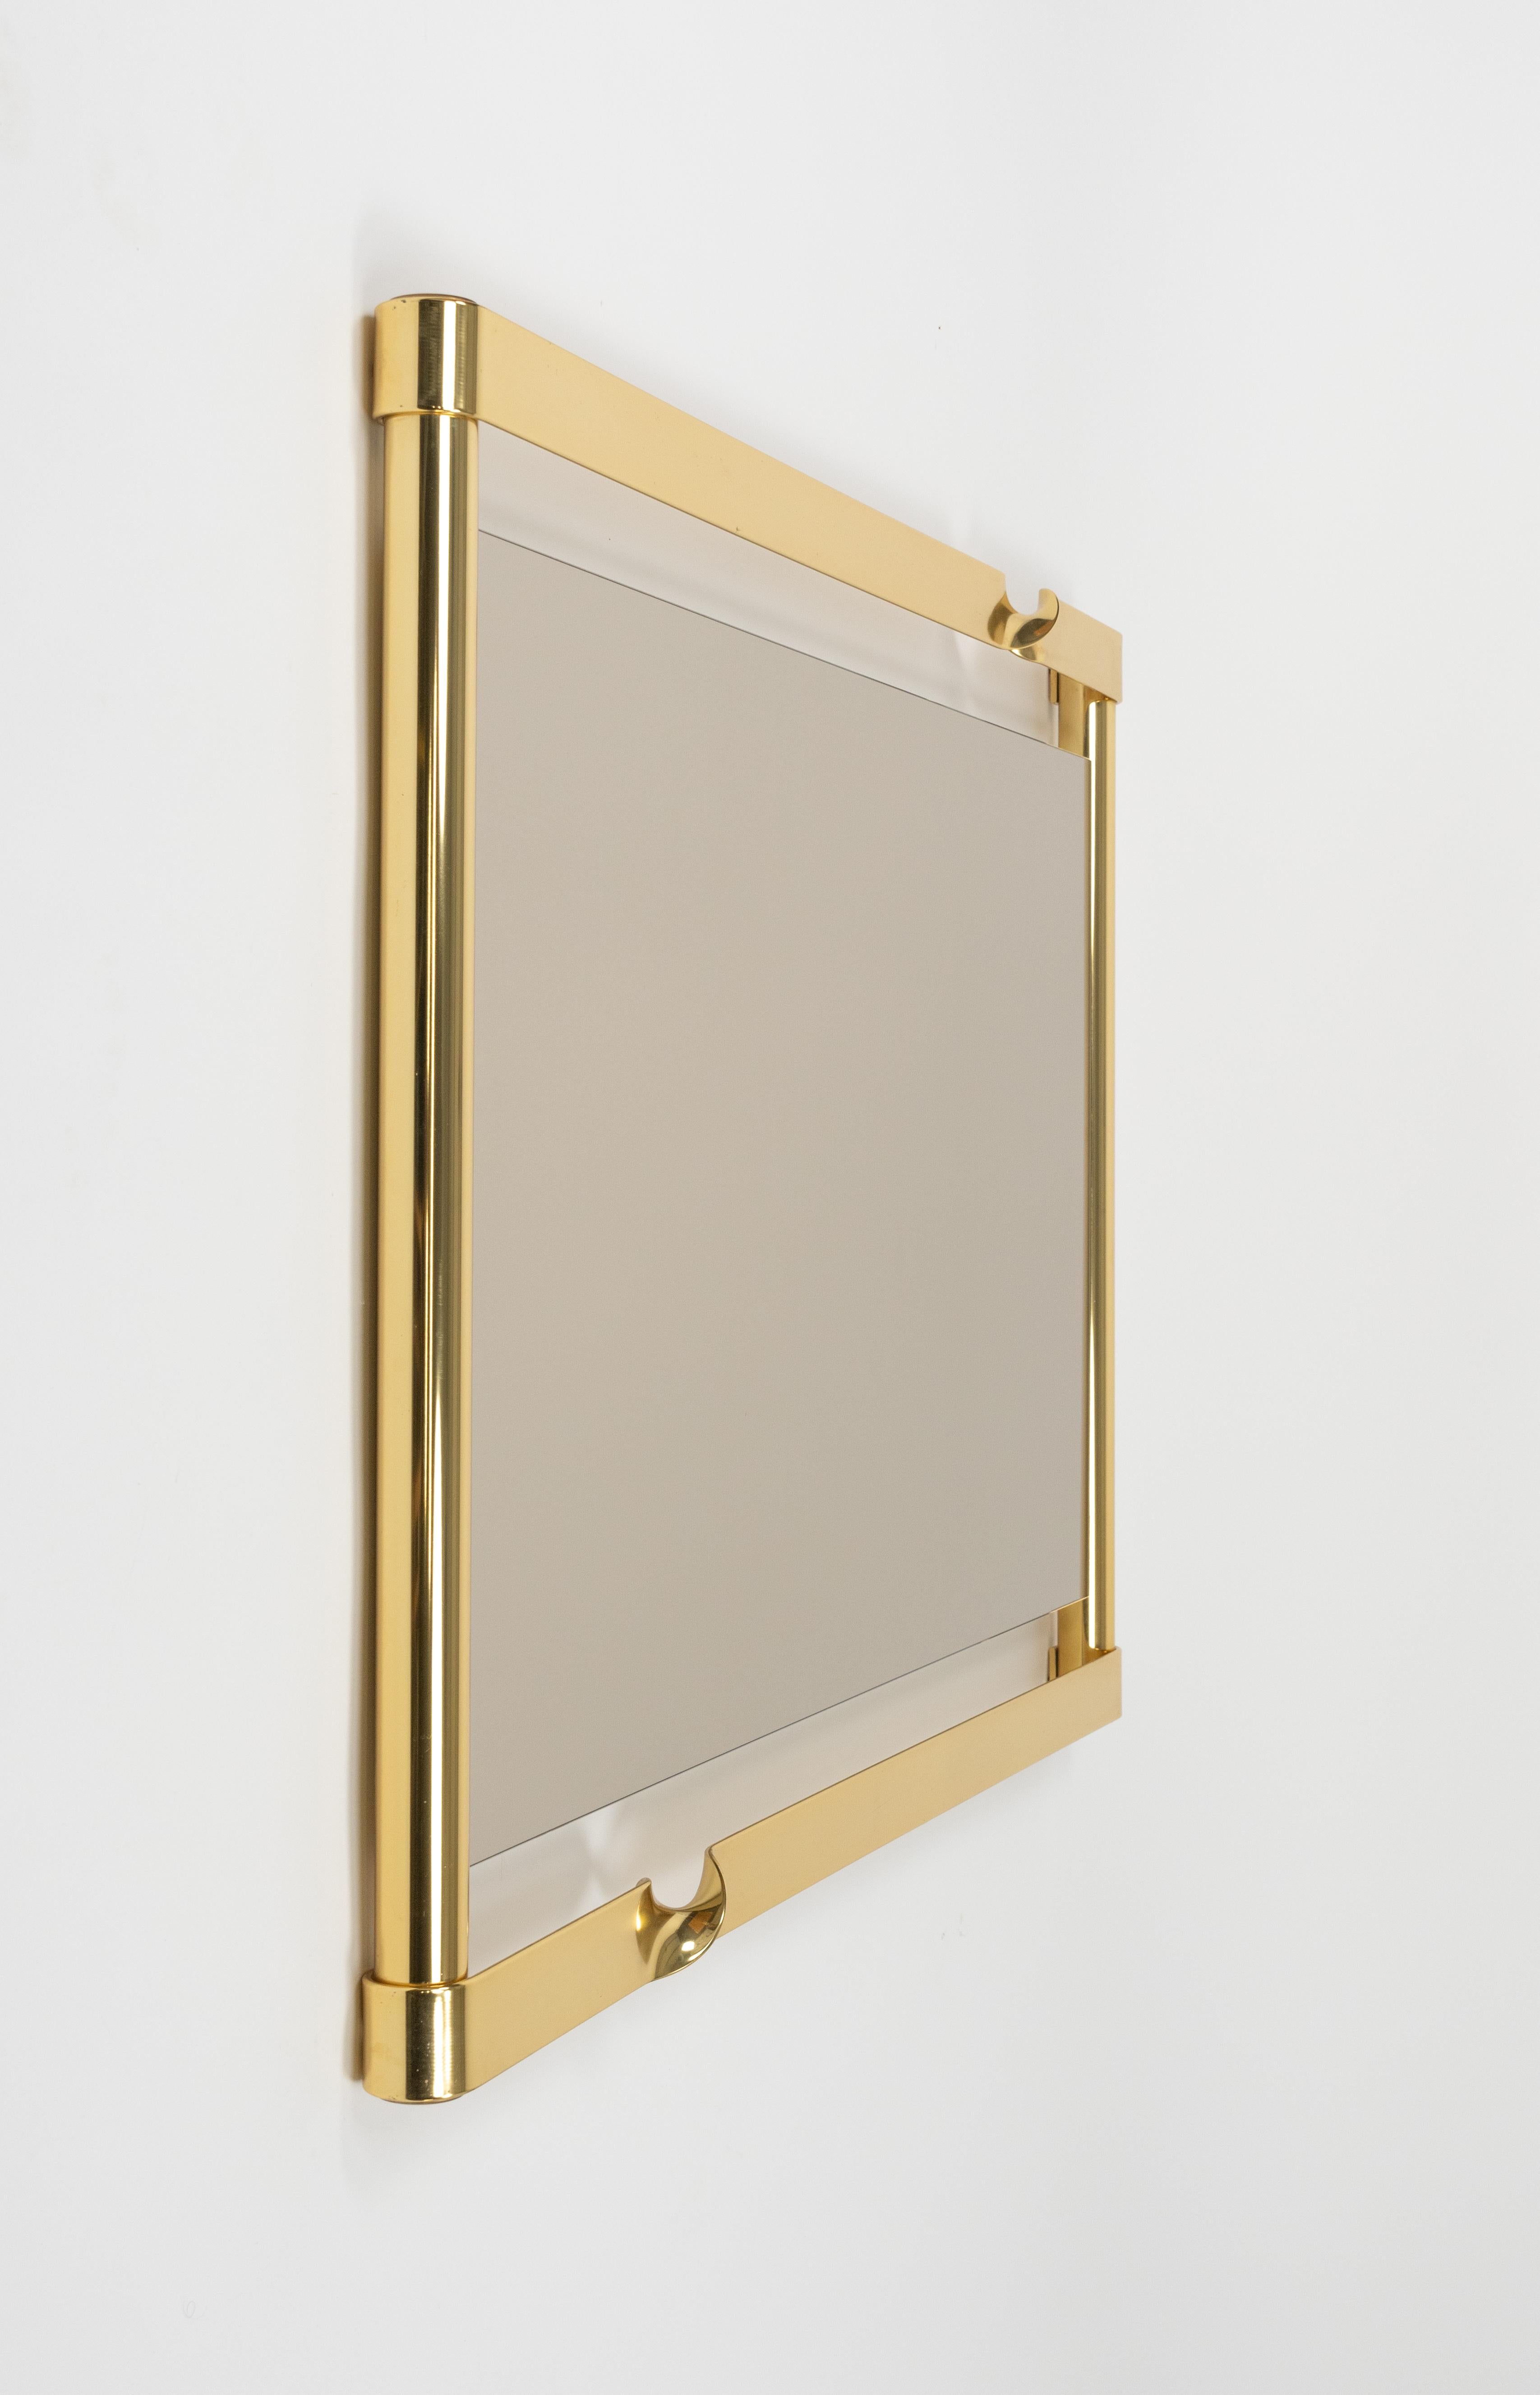 Italian Midcentury Wall Mirror with Golden Twisted by Luciano Frigerio, Italy 1970s For Sale